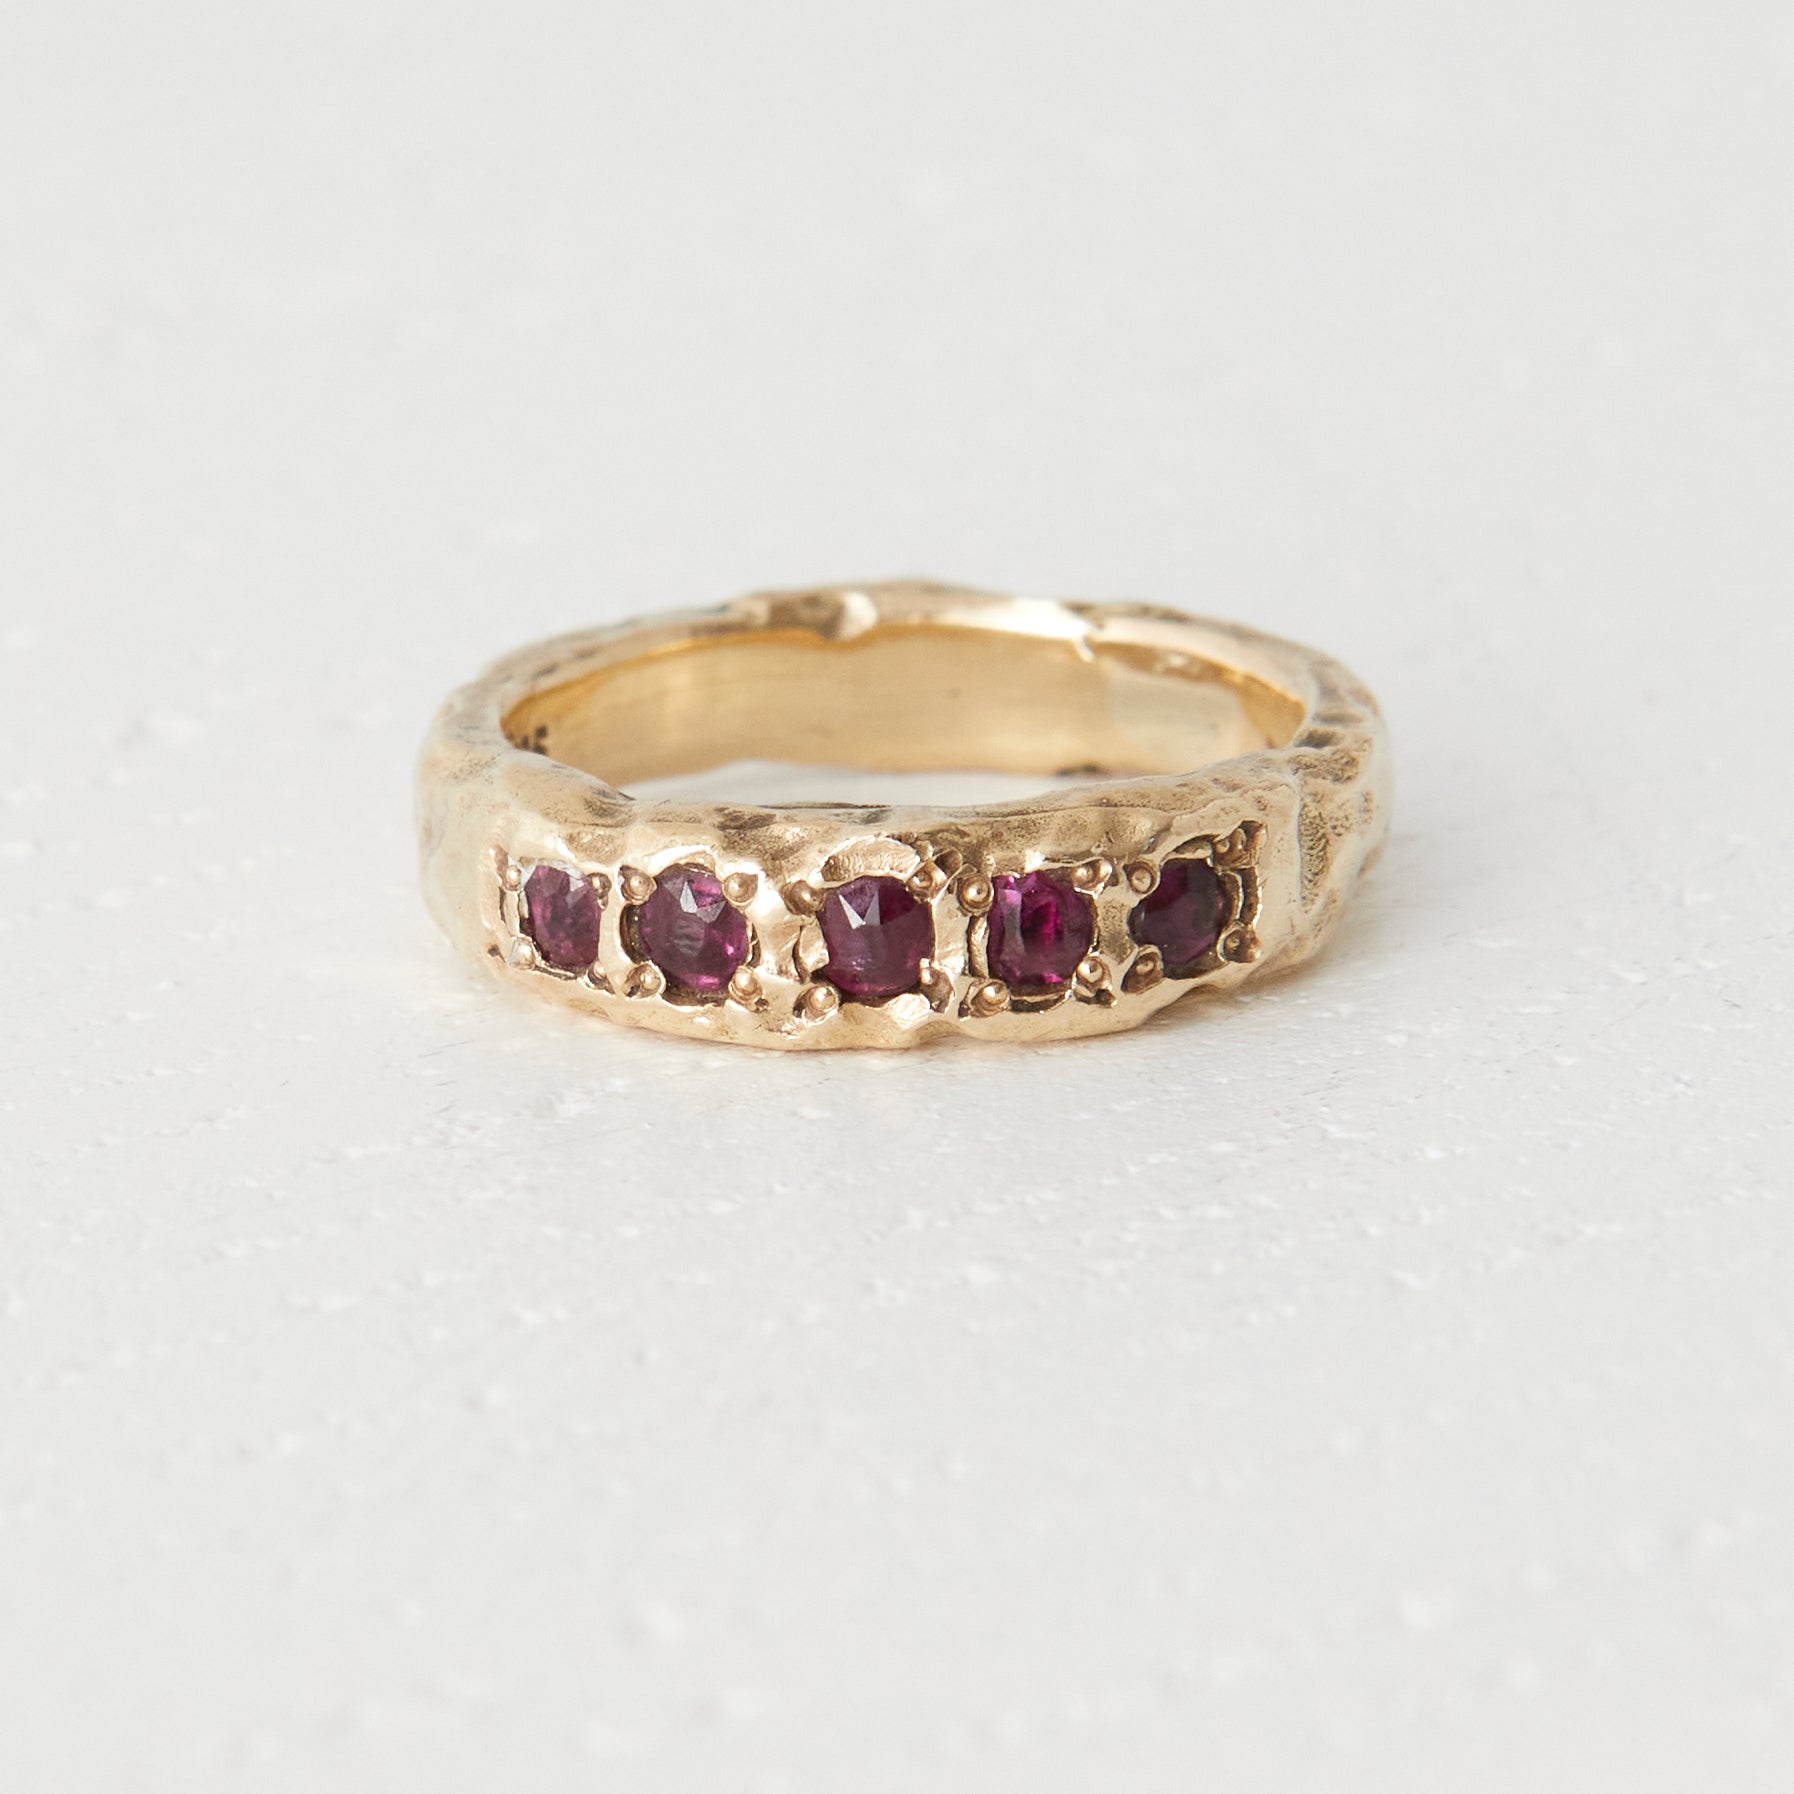 Decayed Ruby Ring